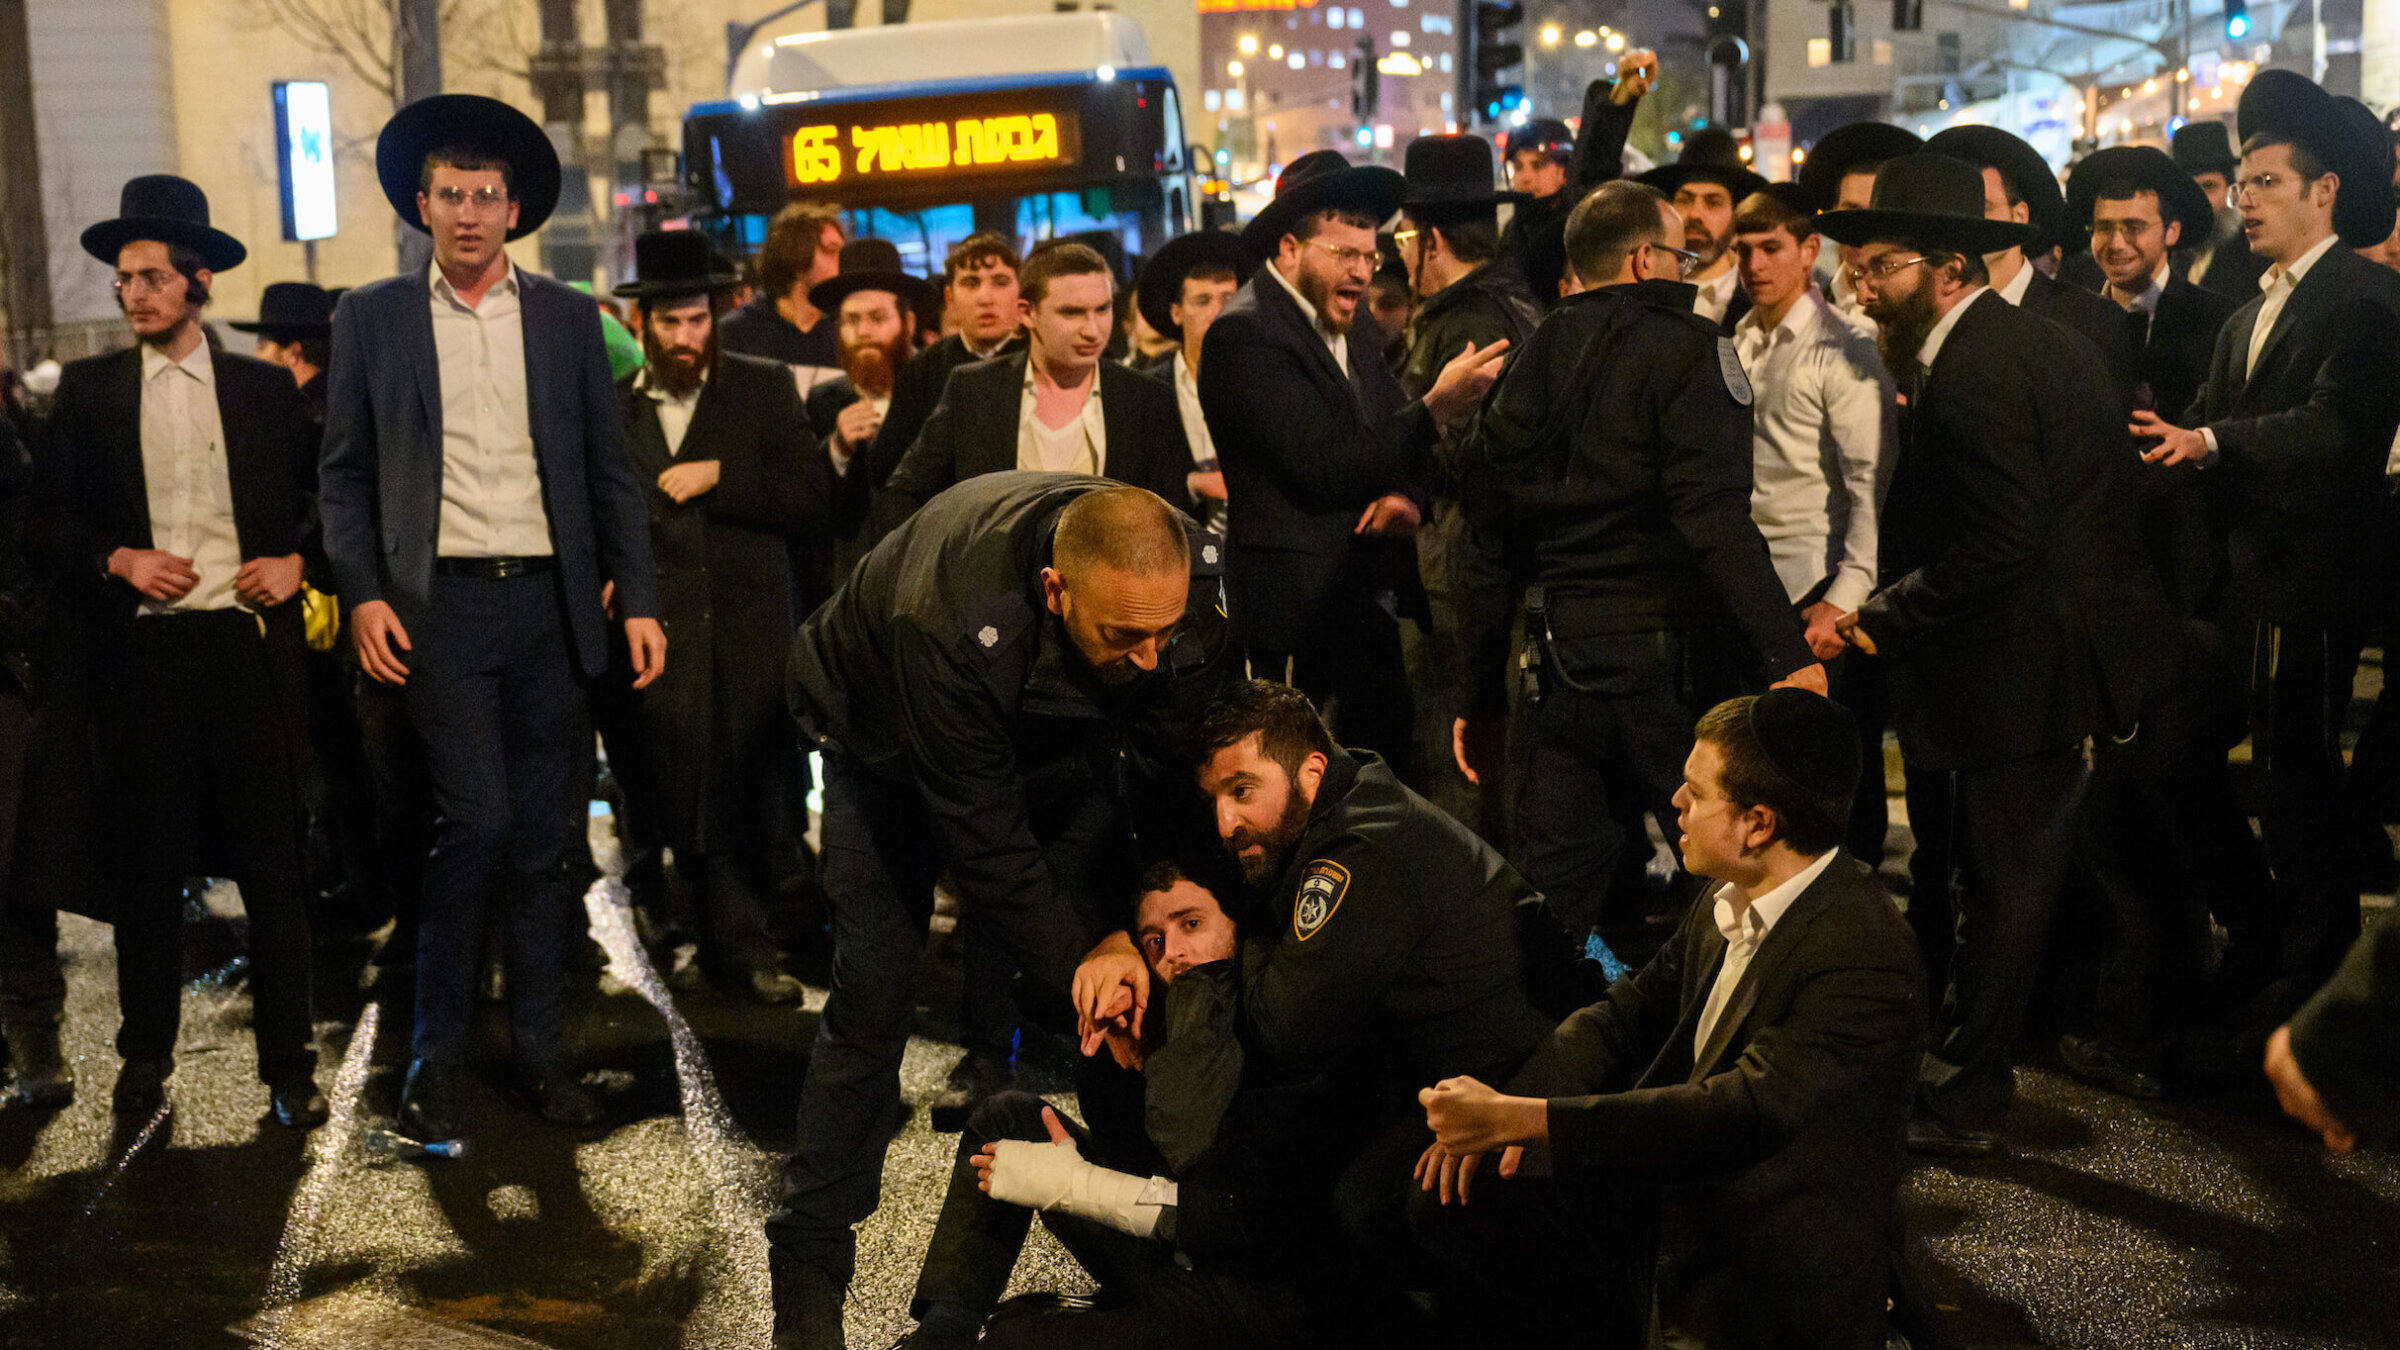 Haredi Jewish boys and men clashed with police earlier in March while protesting against the expiration of a law preventing them from being drafted into the IDF.